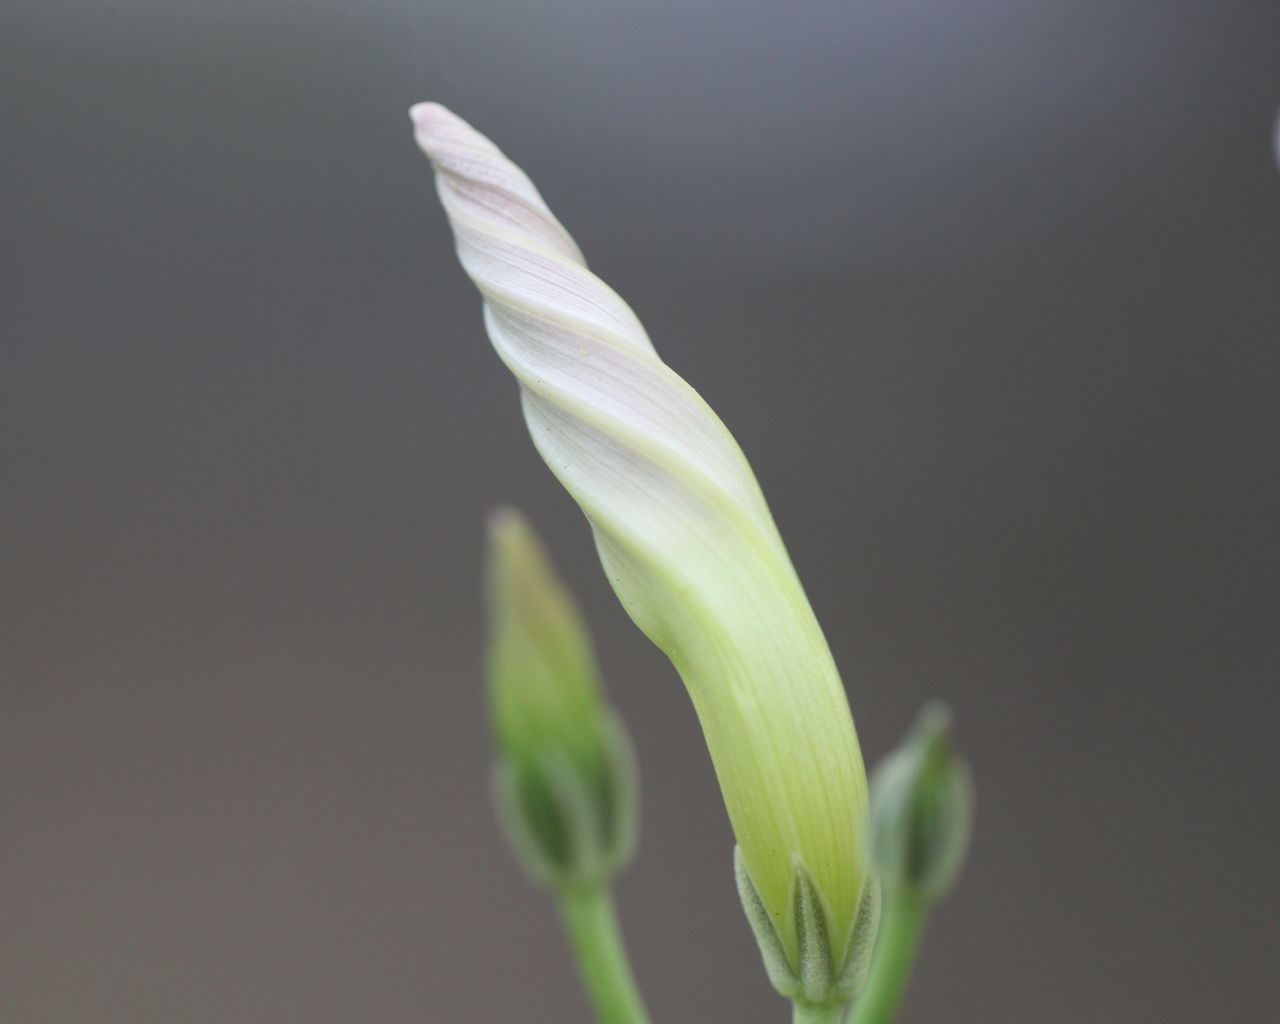 CLOSE-UP OF WHITE FLOWERING PLANT AGAINST BLACK BACKGROUND